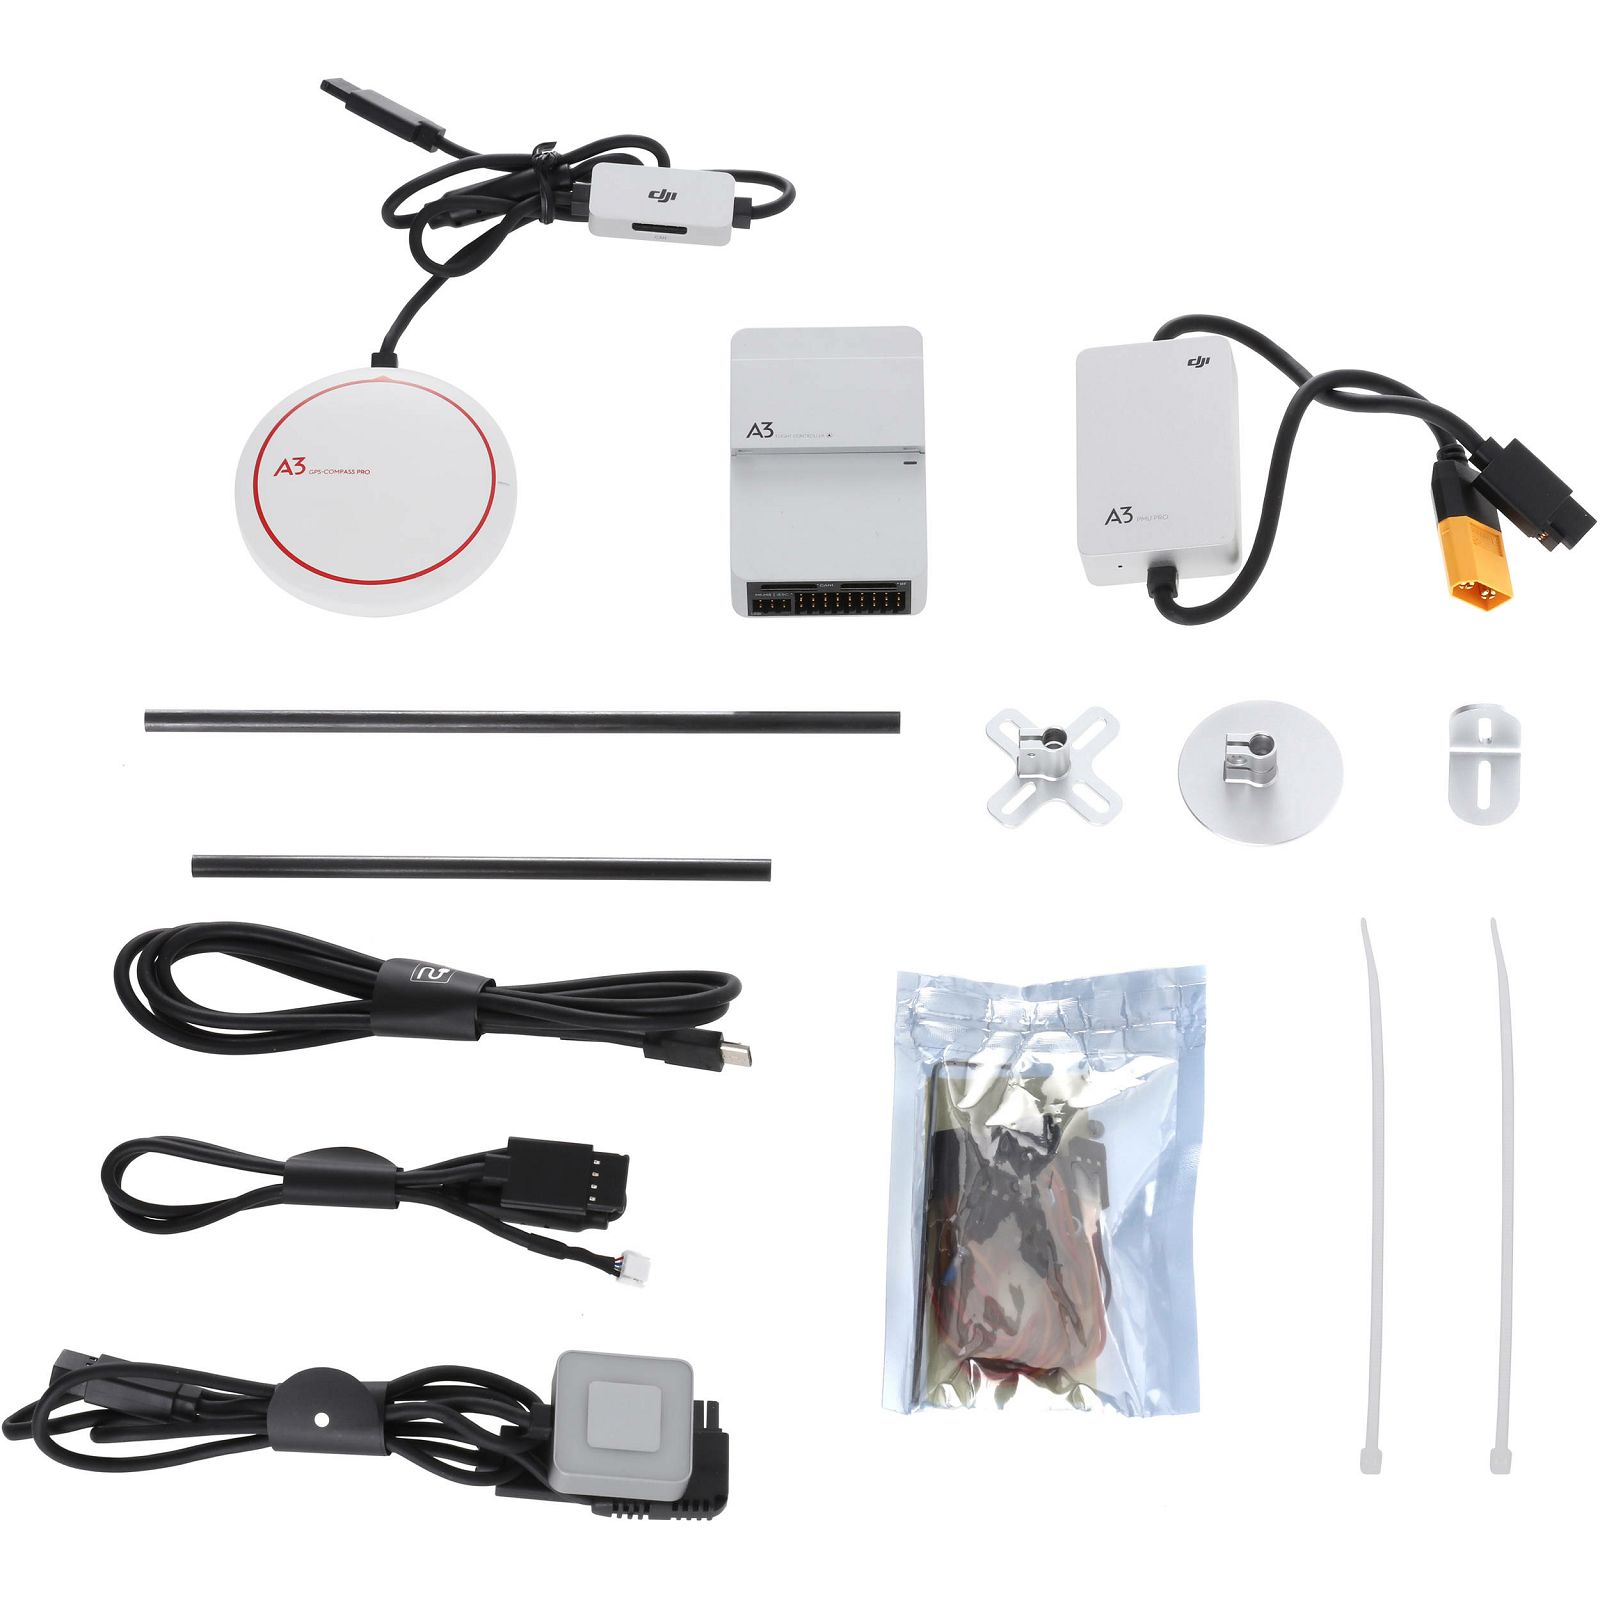 DJI A3 Flight Controller complete stabilization control system for multicopters